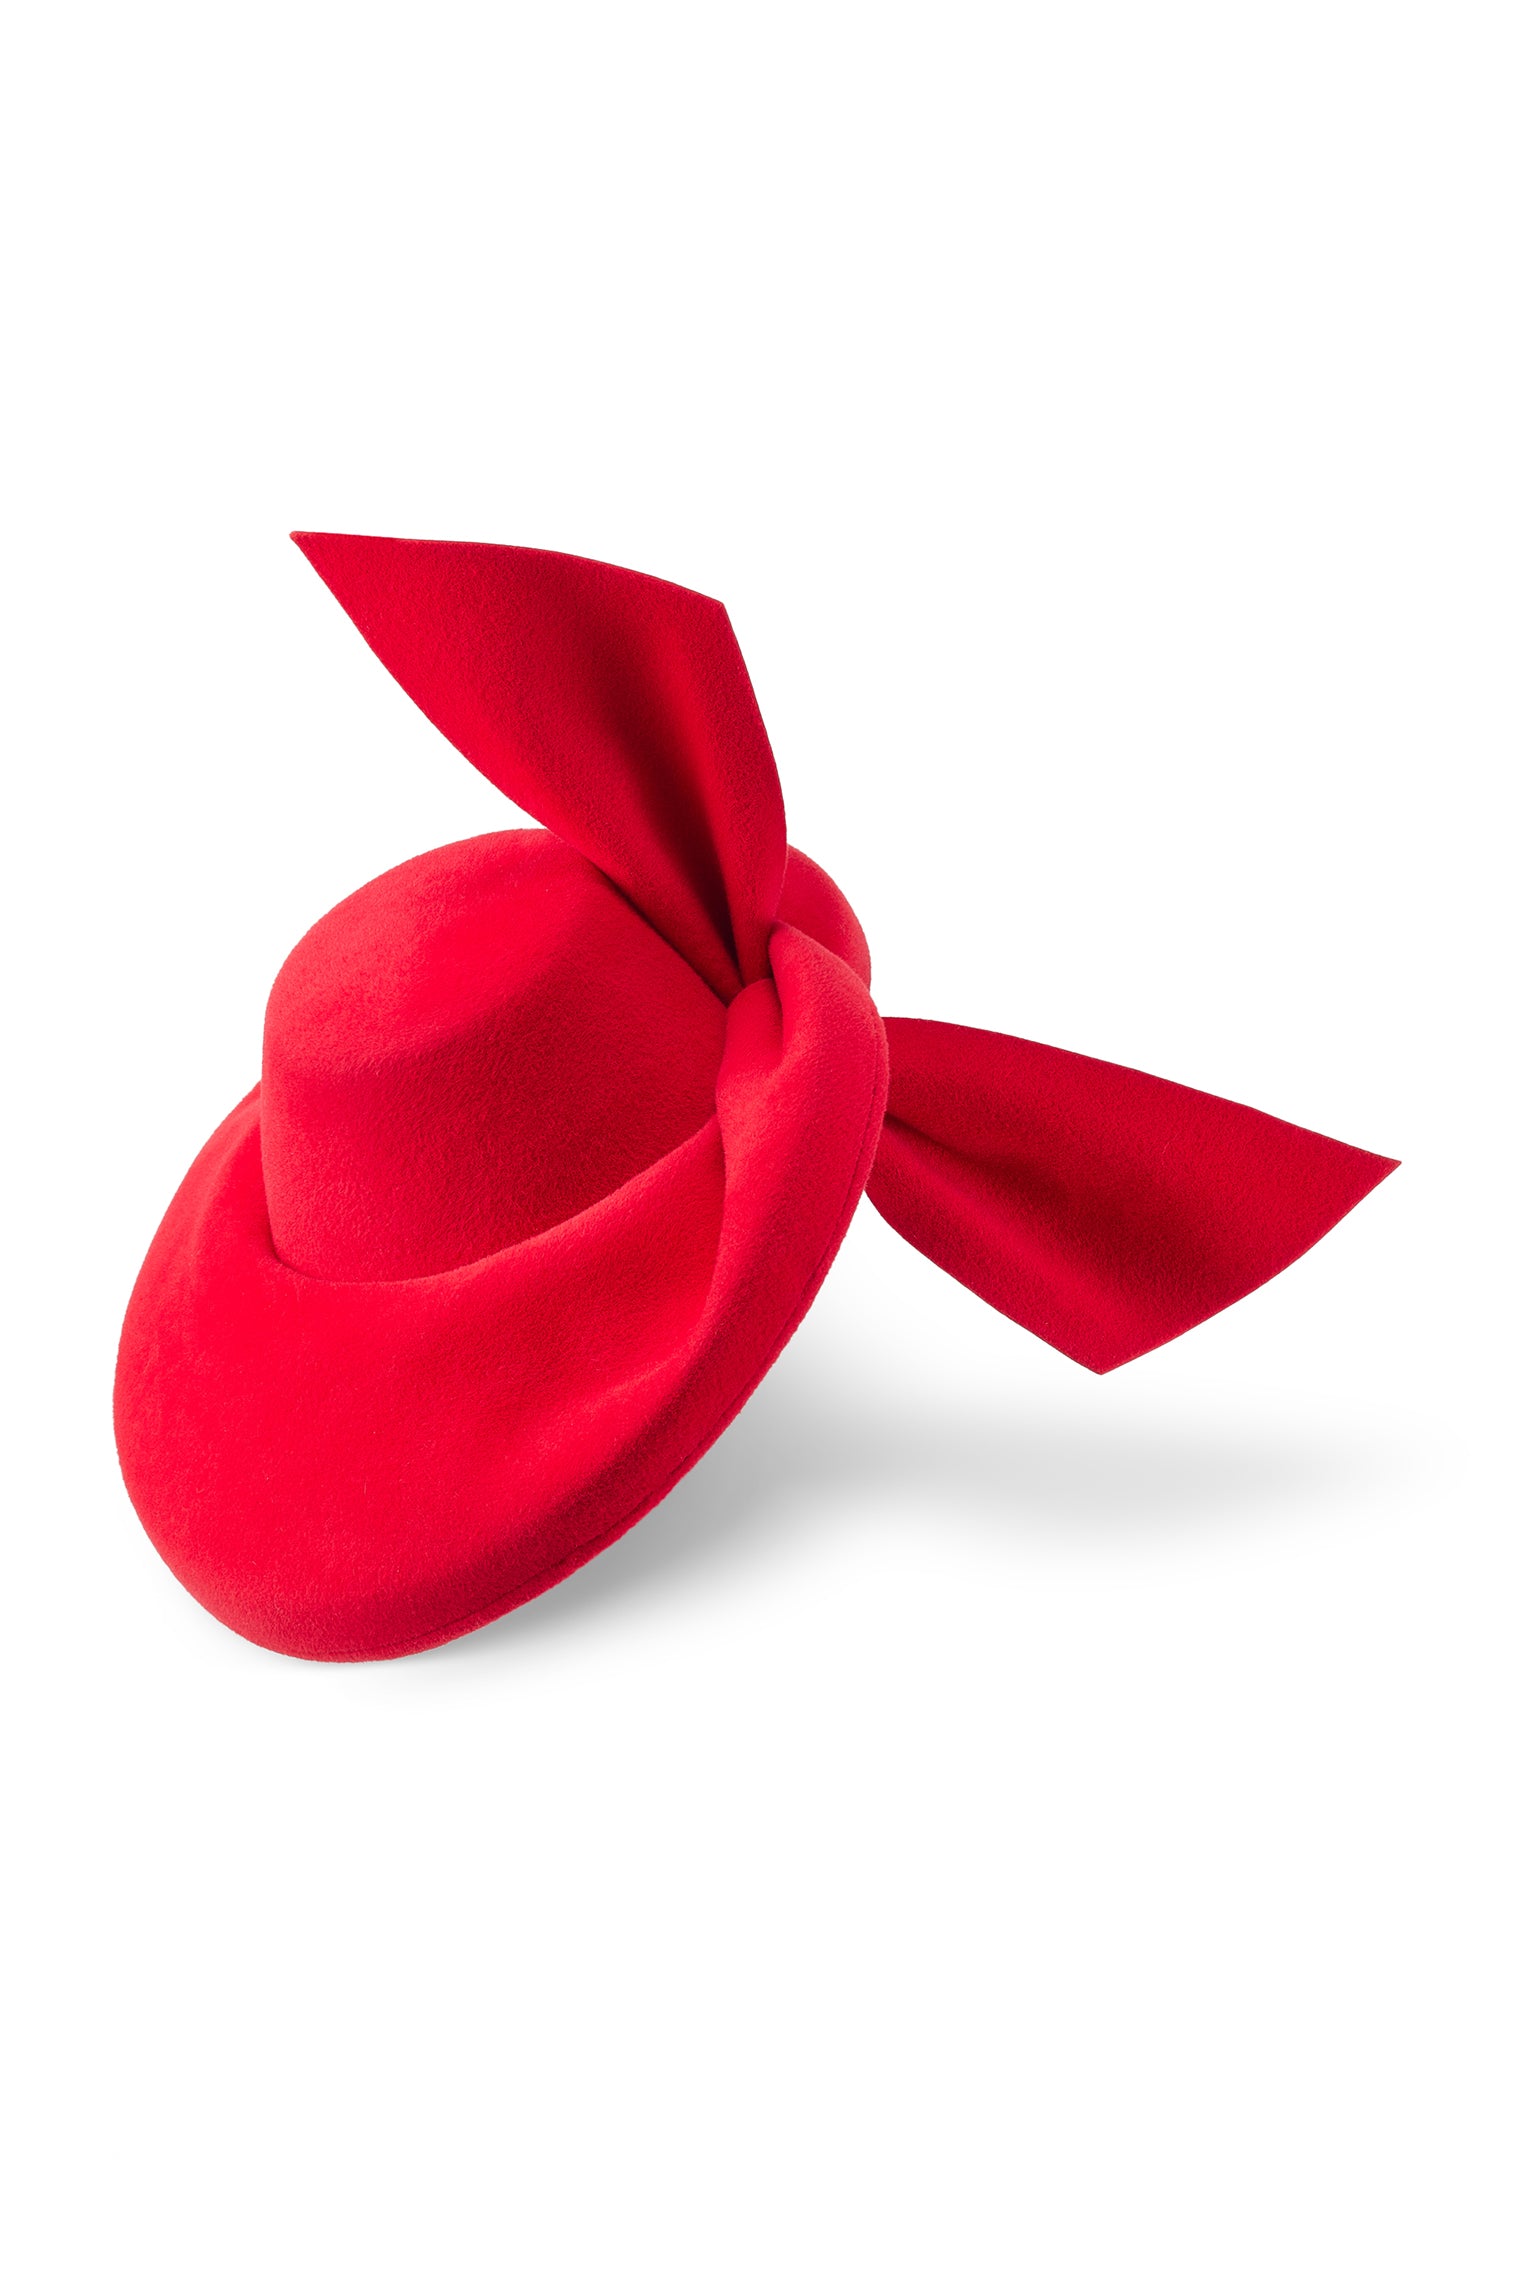 Hedy Red Percher Hat - Lock Couture by Awon Golding - Lock & Co. Hatters London UK